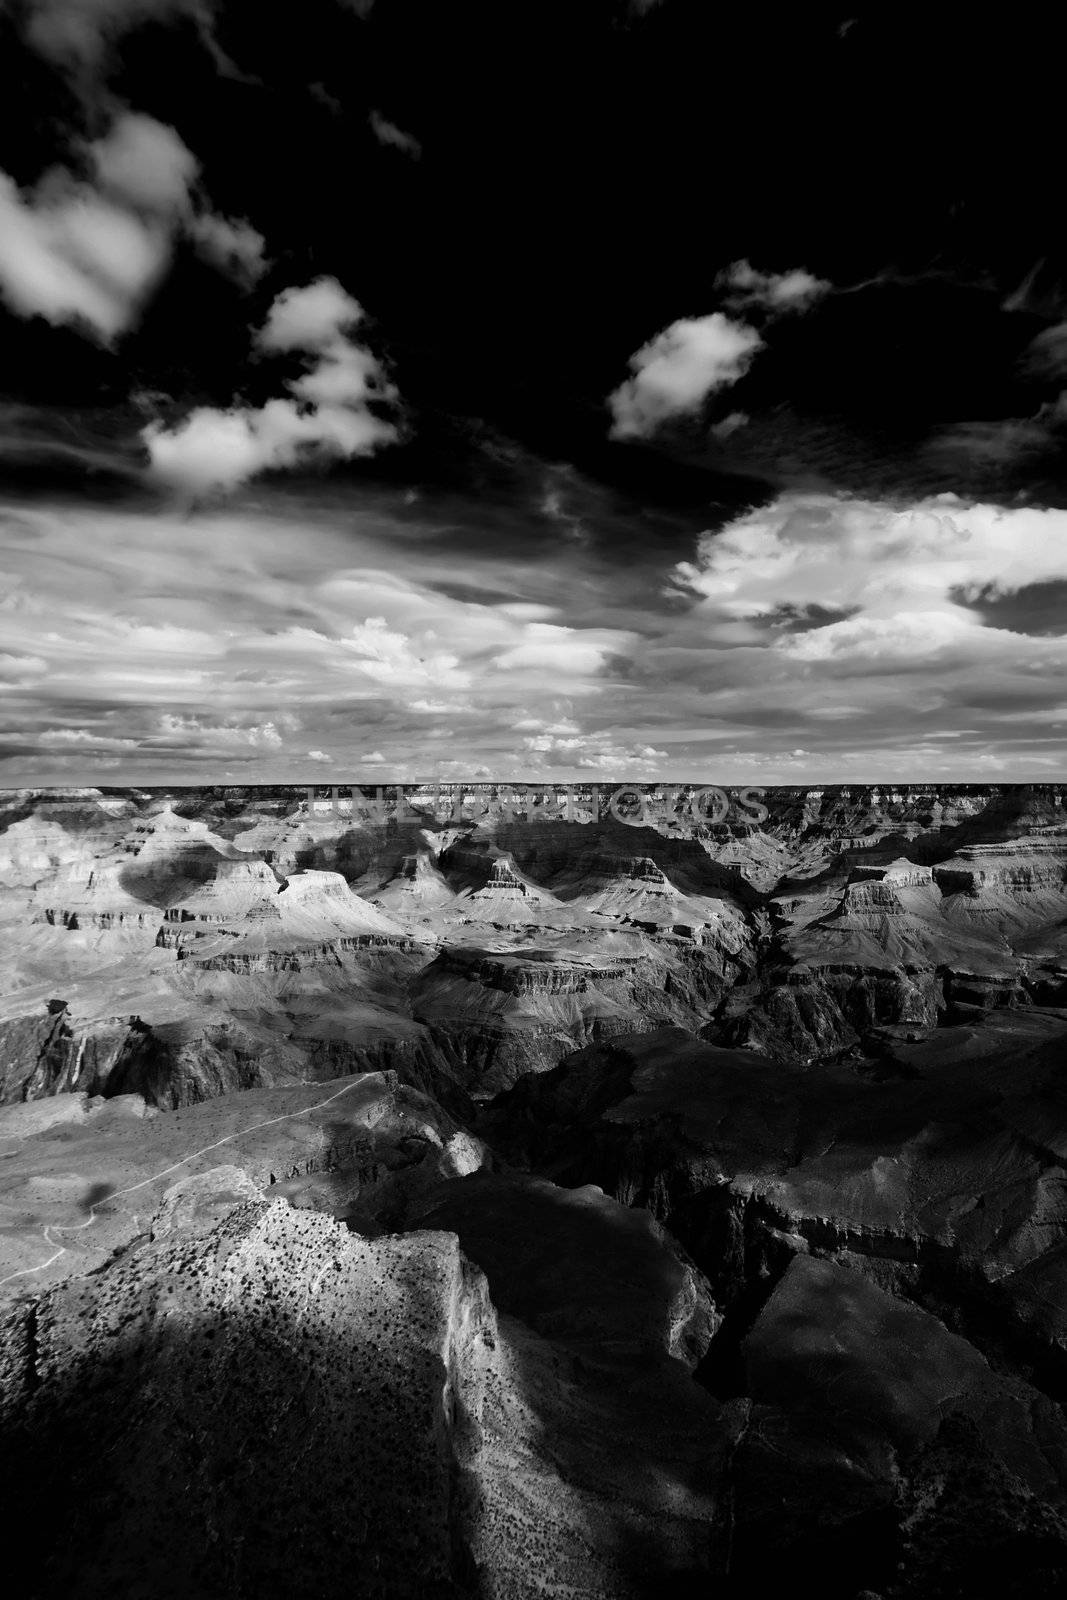 Grand Canyon by Creatista